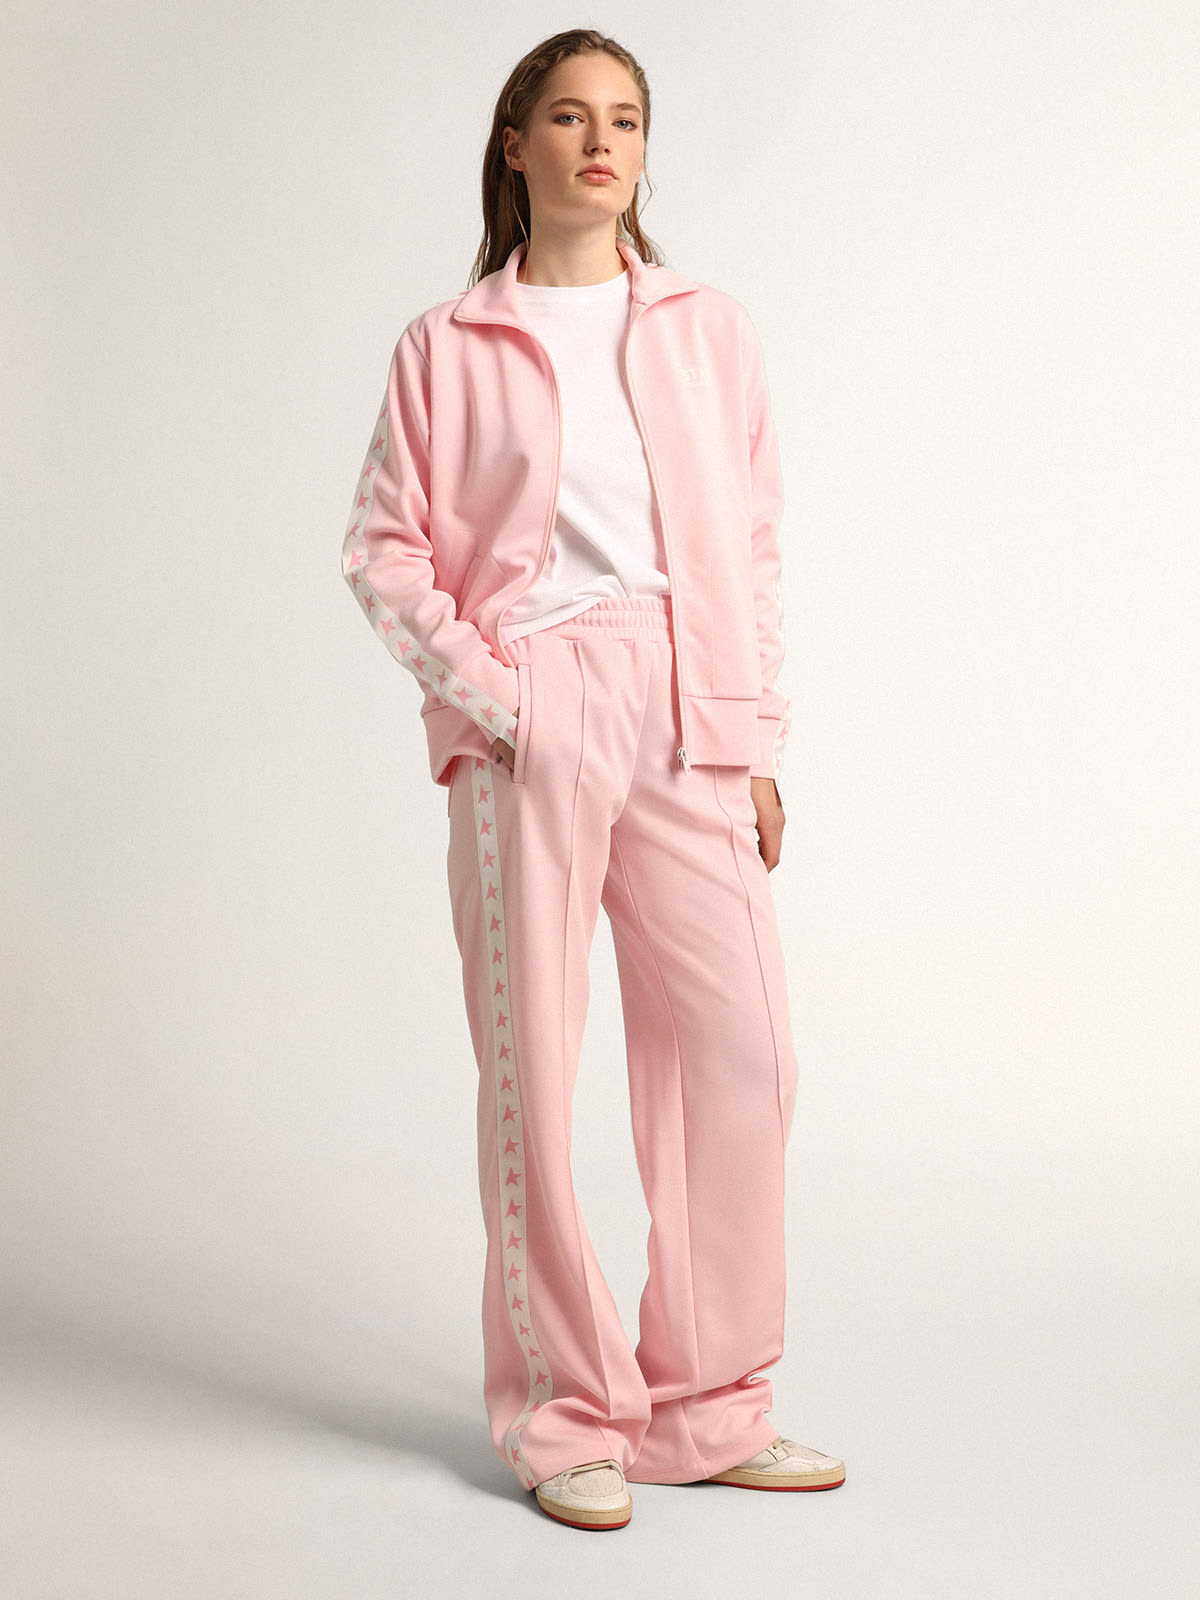 Golden Goose - Pink Denise Star Collection zipped sweatshirt with white strip and contrasting pink stars in 